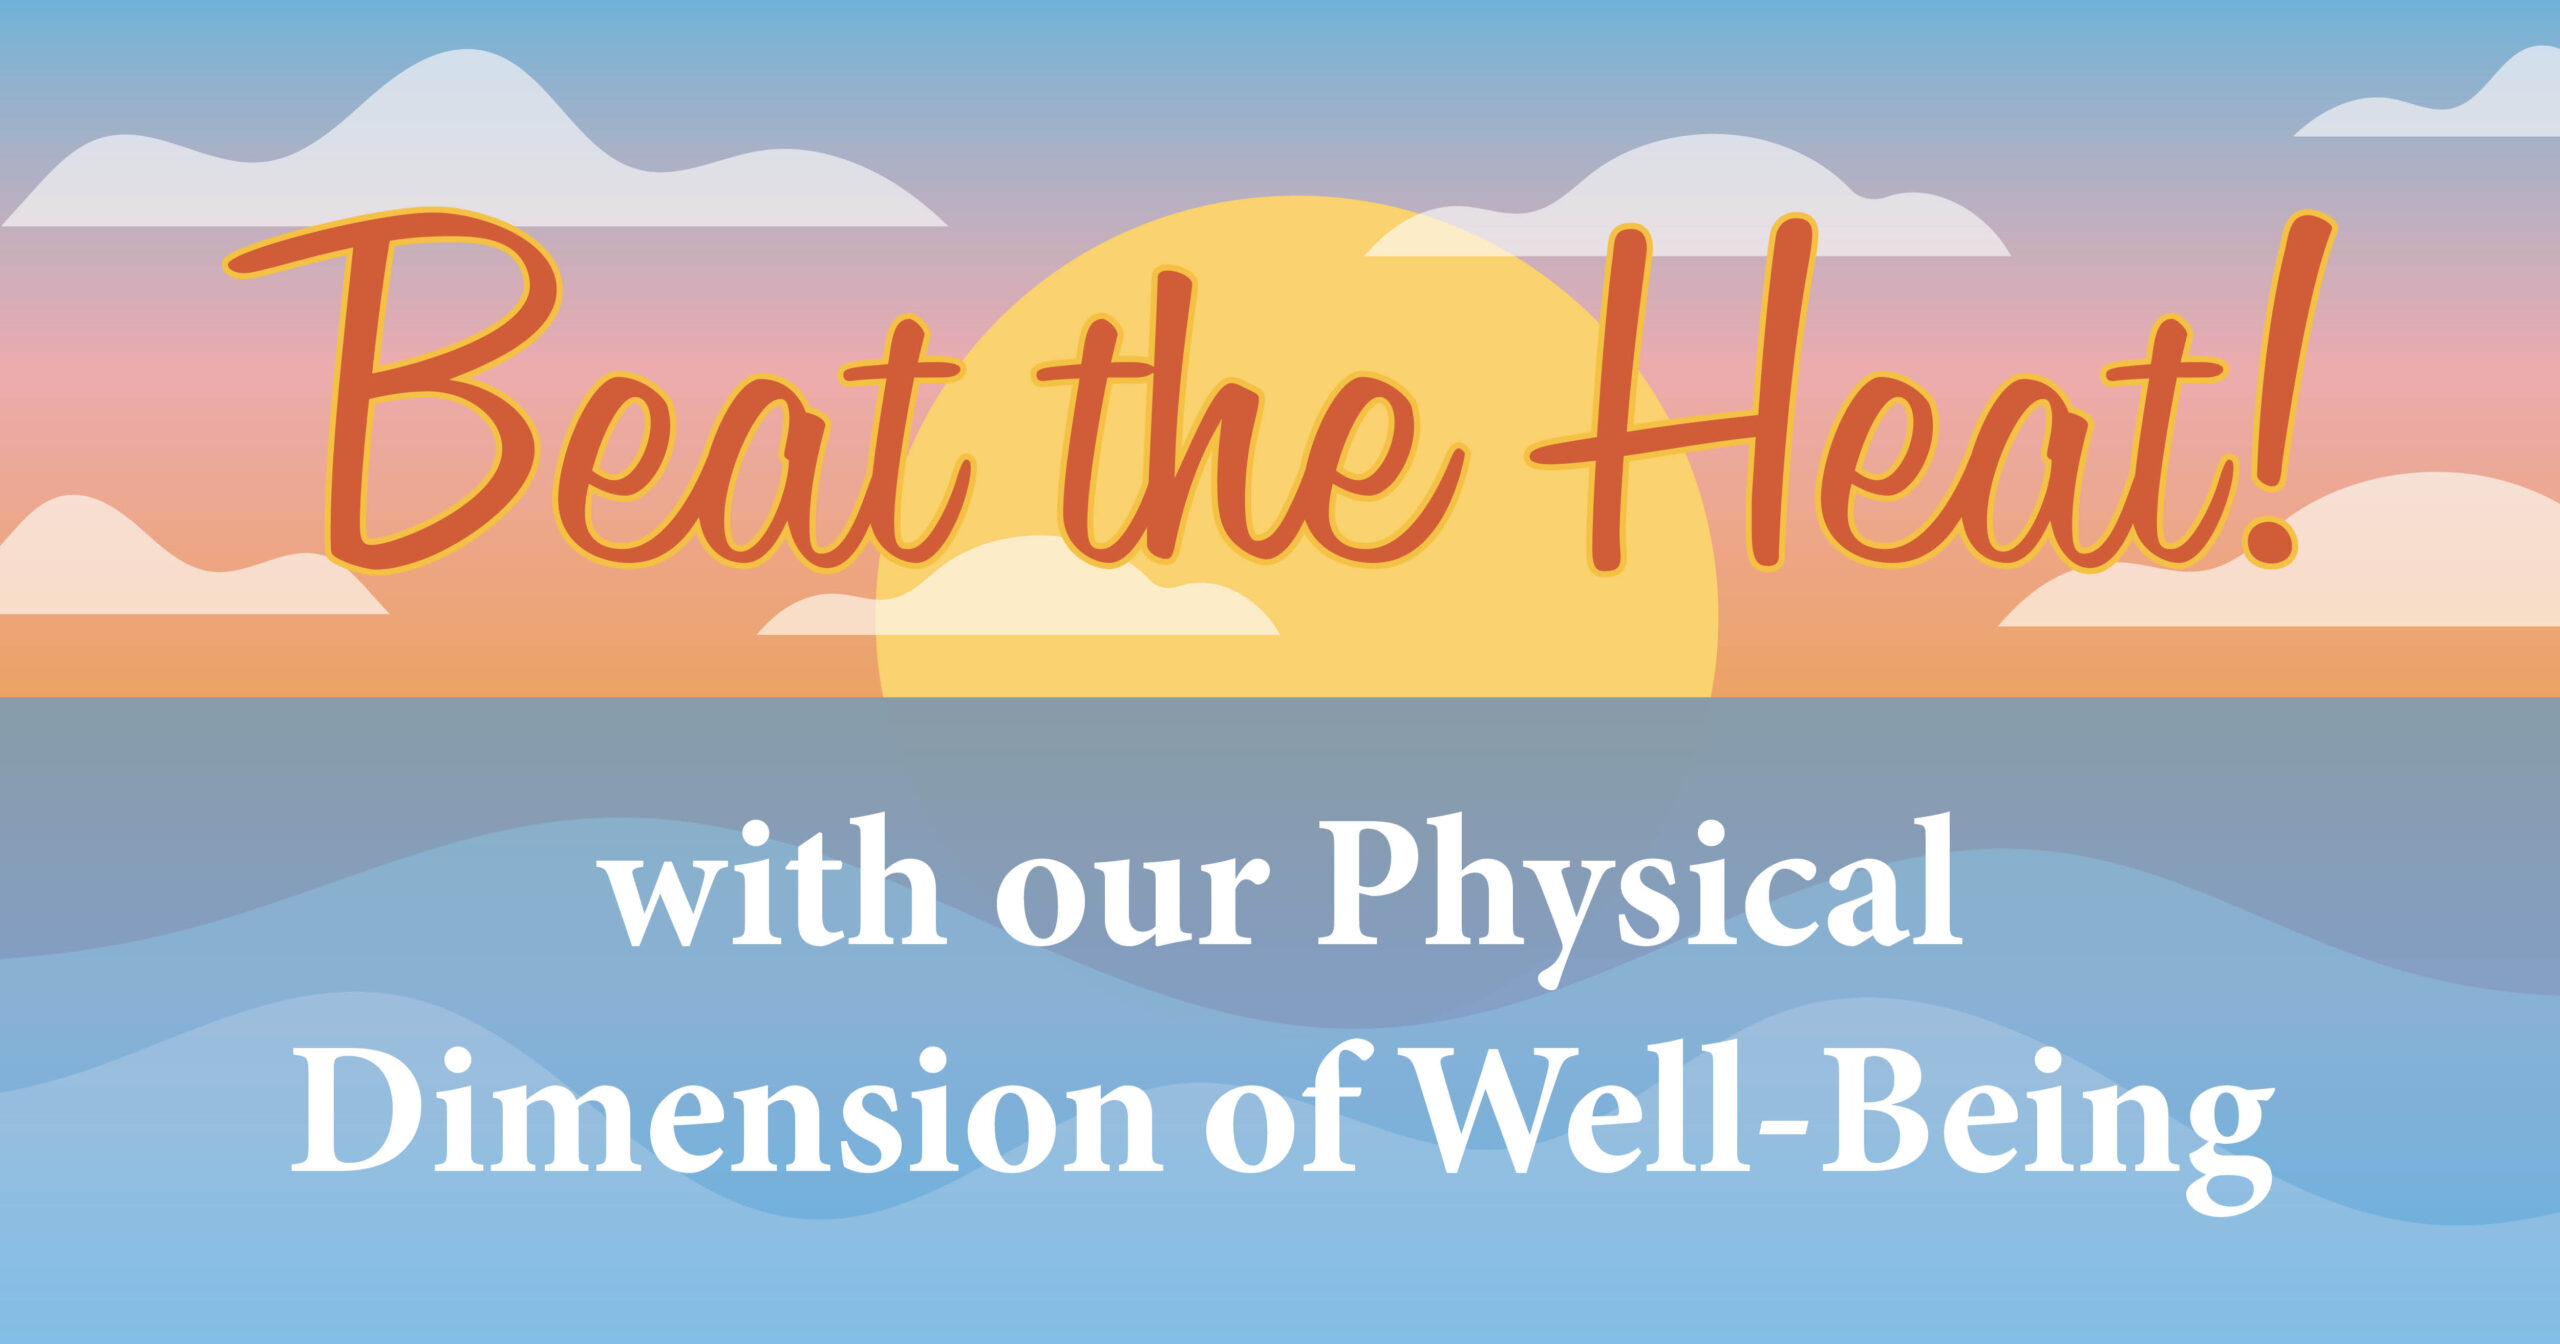 Beat the Heat with our Physical Dimension of Well-Being